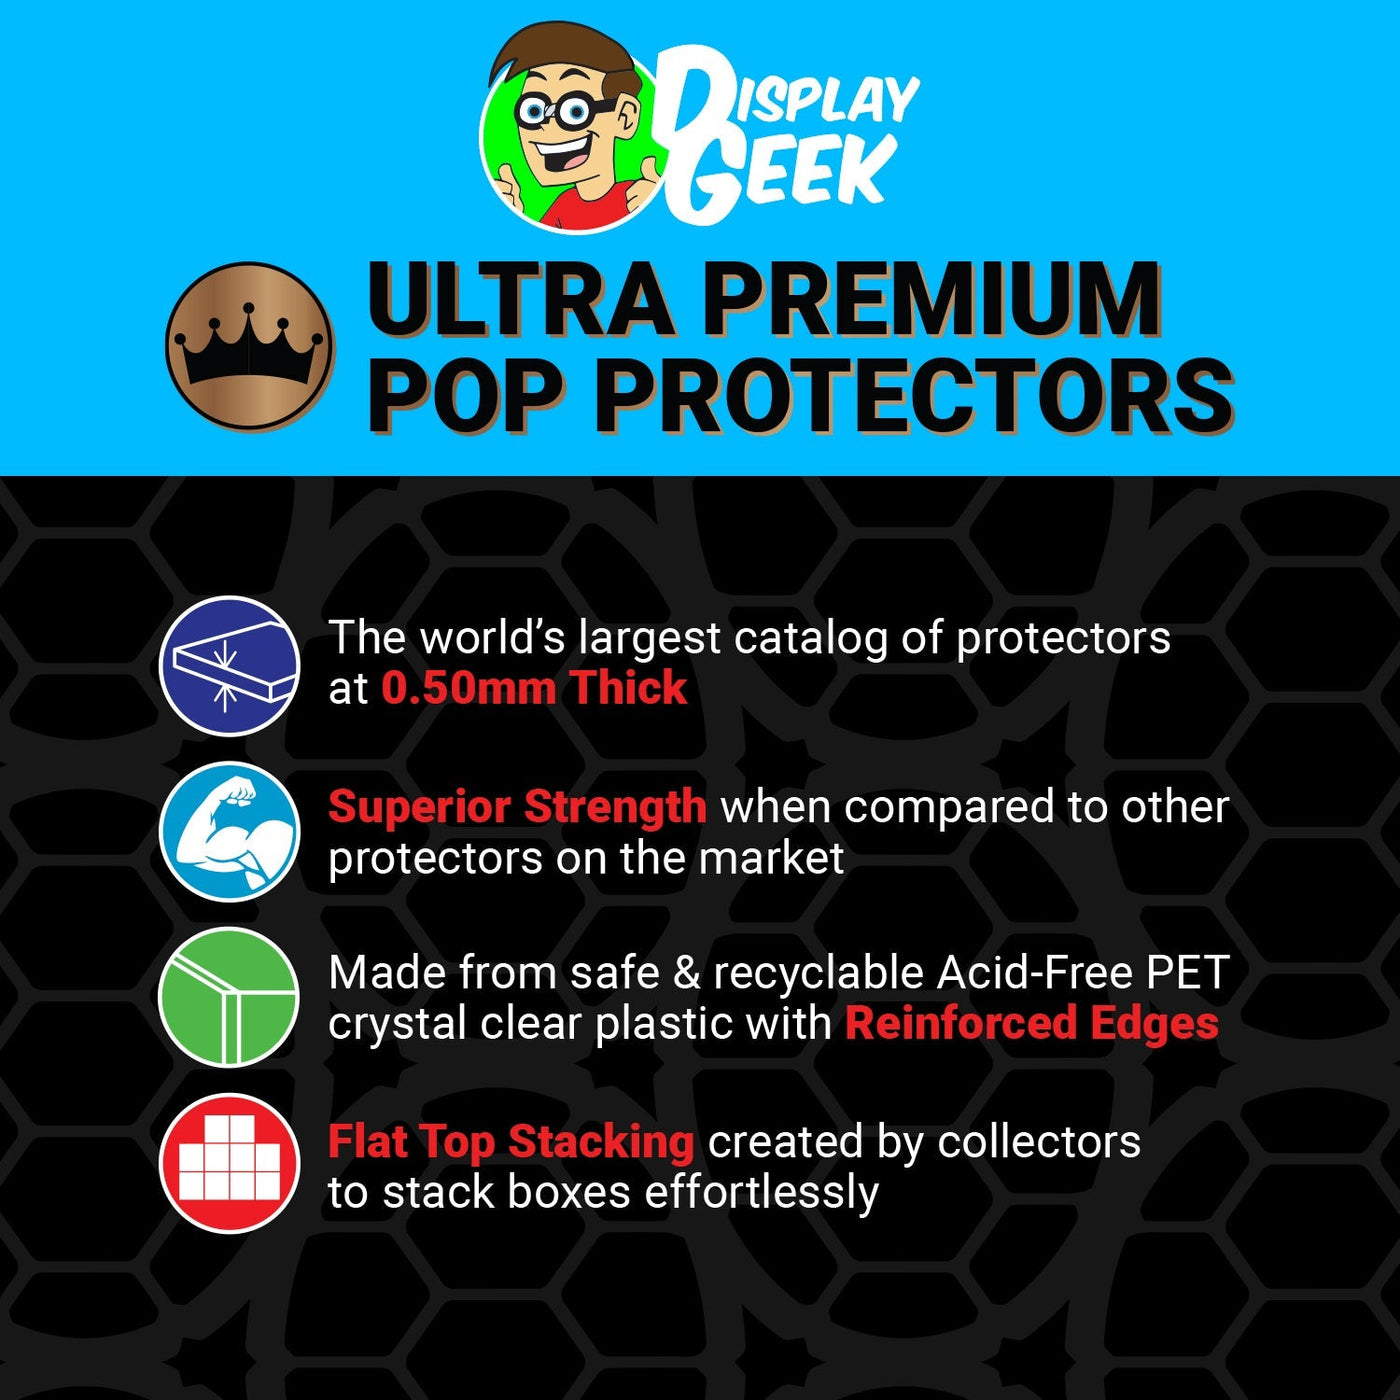 Pop Protector for Toucan SDCC Funko Pop Pez on The Protector Guide App by Display Geek